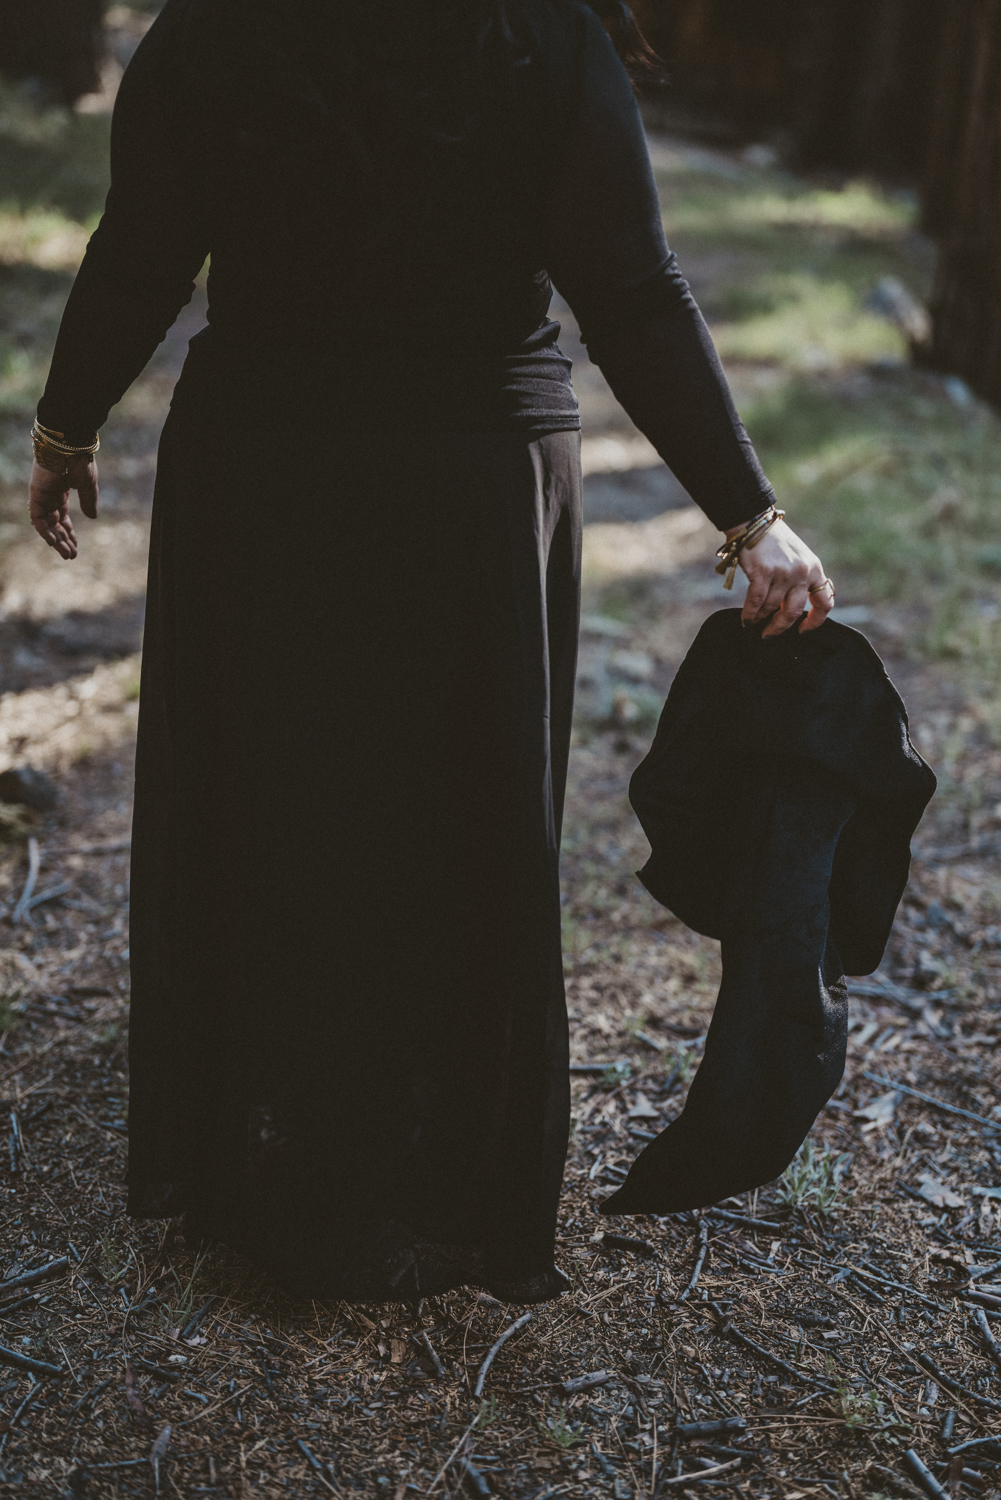 An image of elena in a black dress walking away, with a witch hat trailing behind her